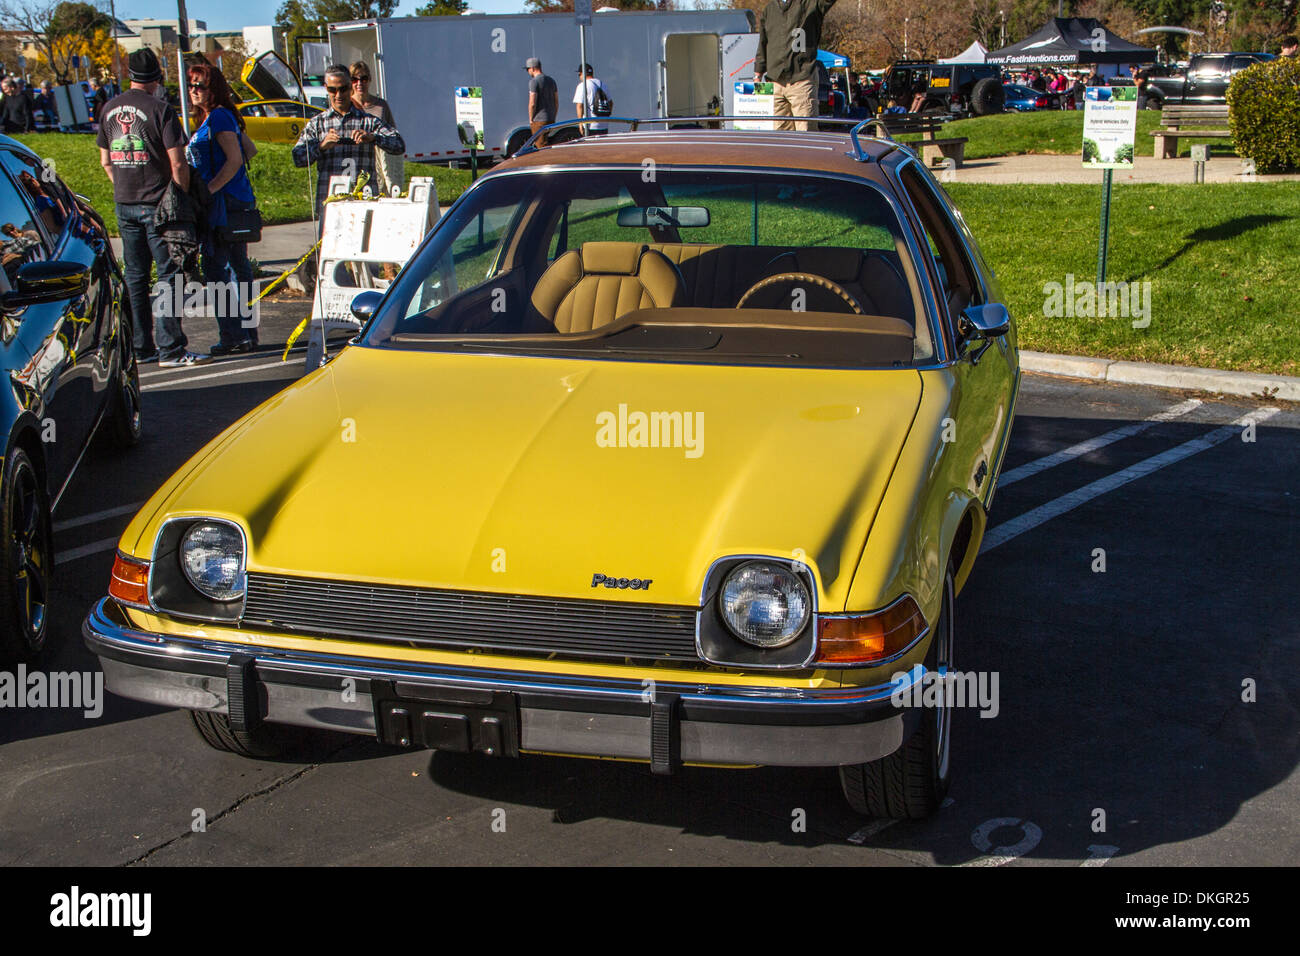 An AMC Pacer at the 2013 Motor4toys Event in Woodland Hills California Stock Photo